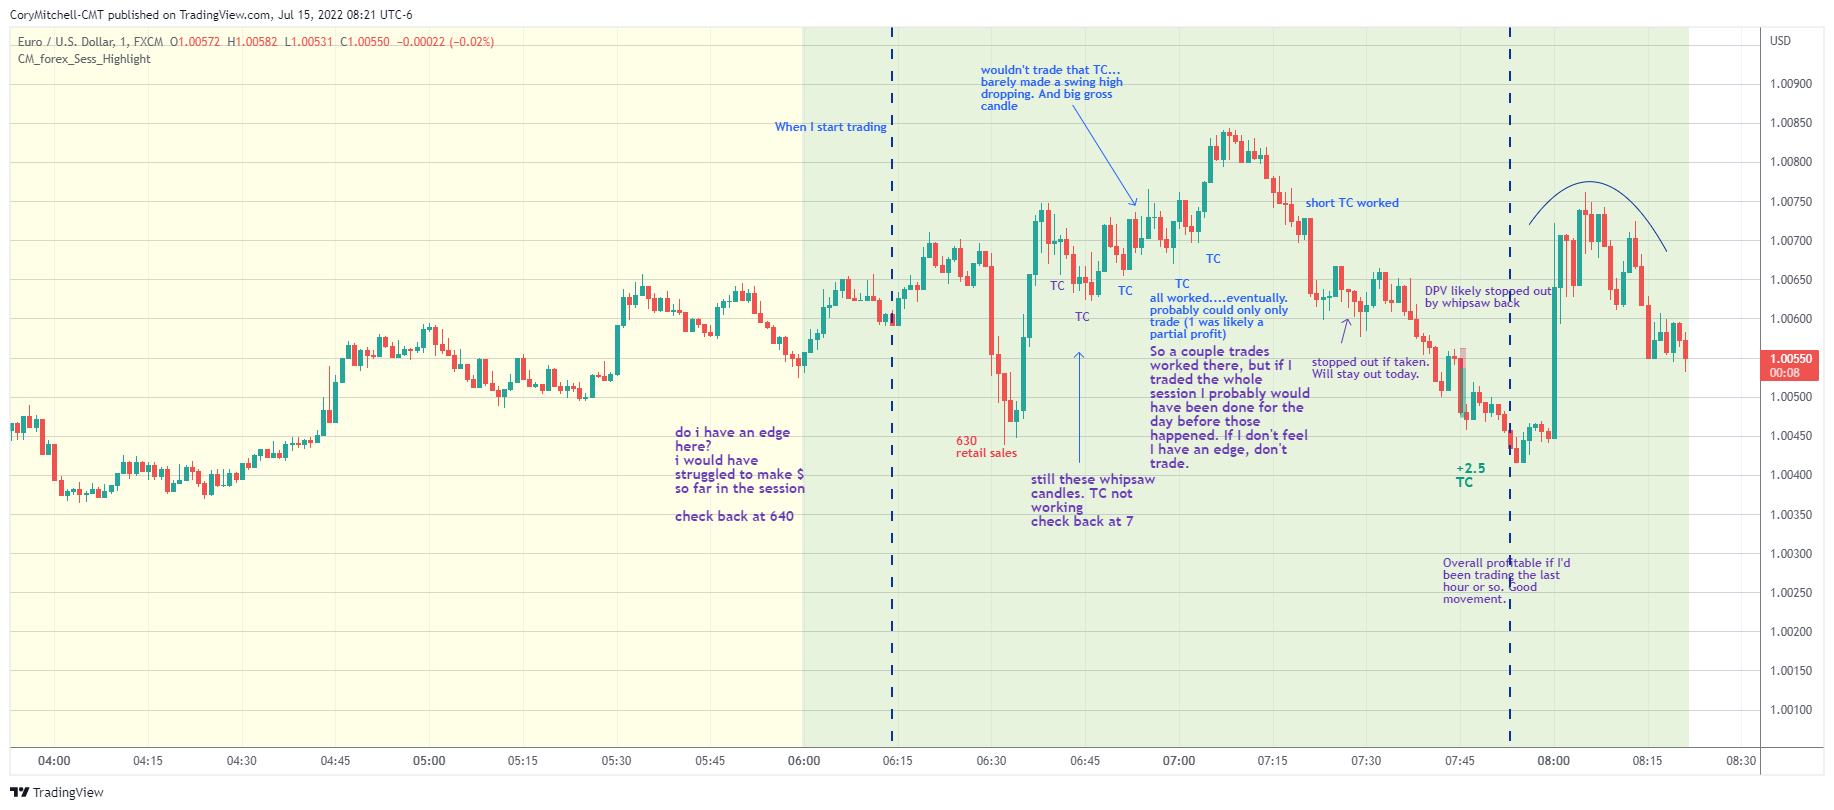 EURUSD day trading strategy examples July 15